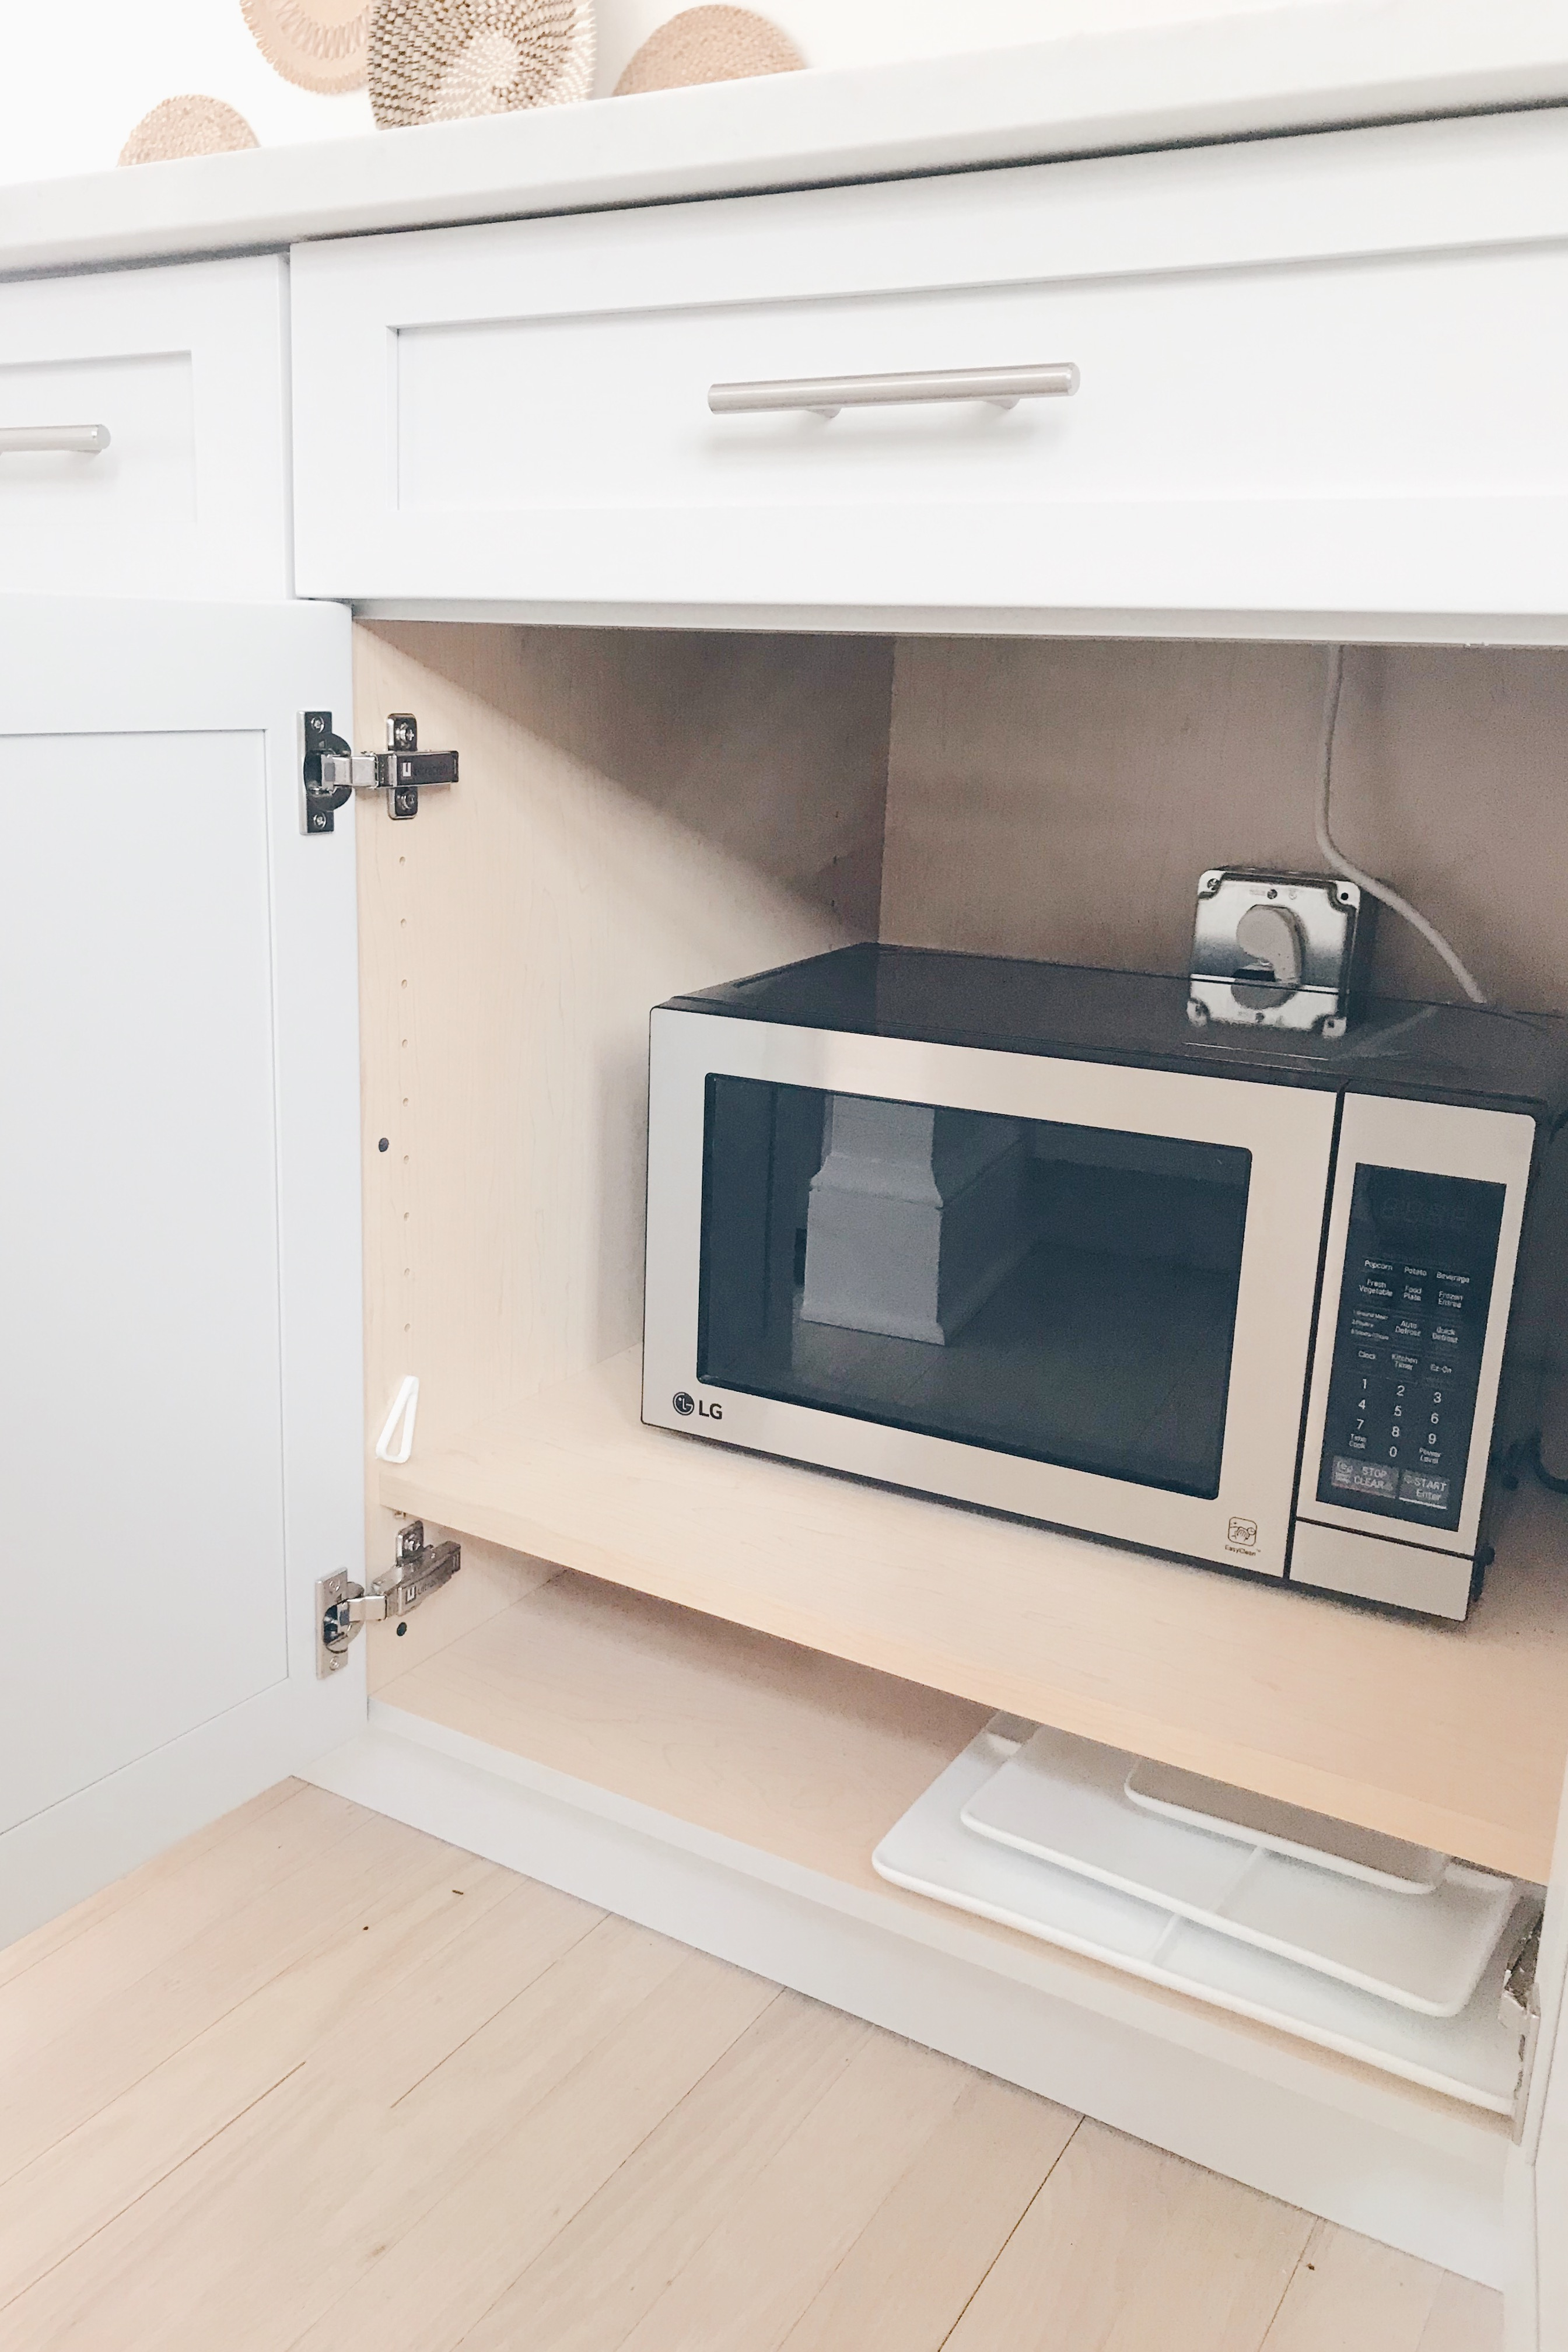 MUST READ - Number 1 tip when planning a kitchen renovation - hiding the microwave